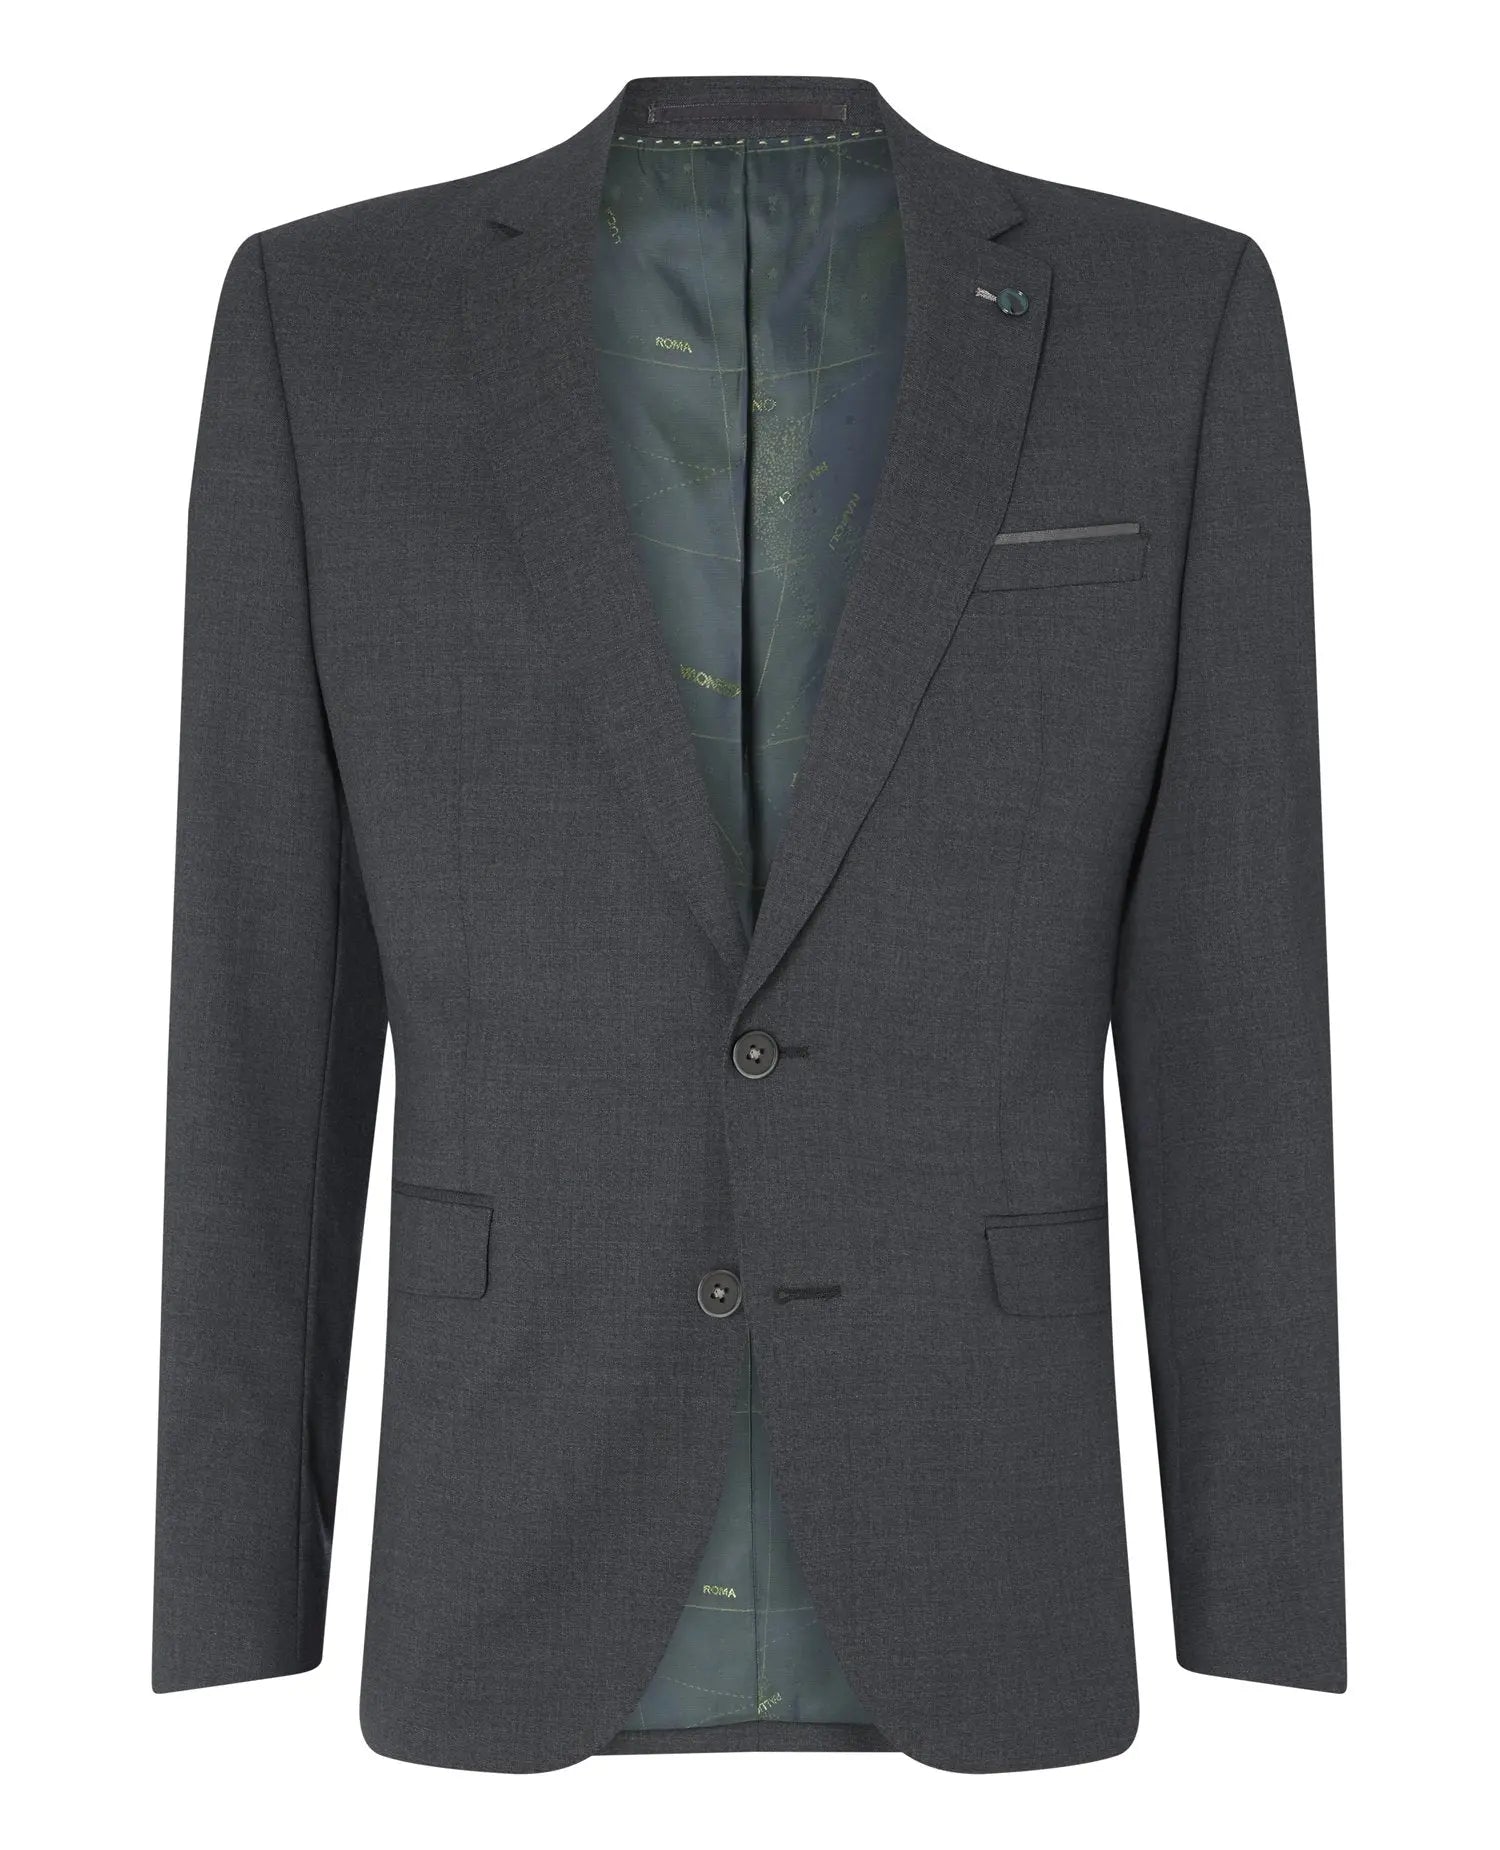 Remus Uomo Lucian Suit Jacket - Charcoal Grey